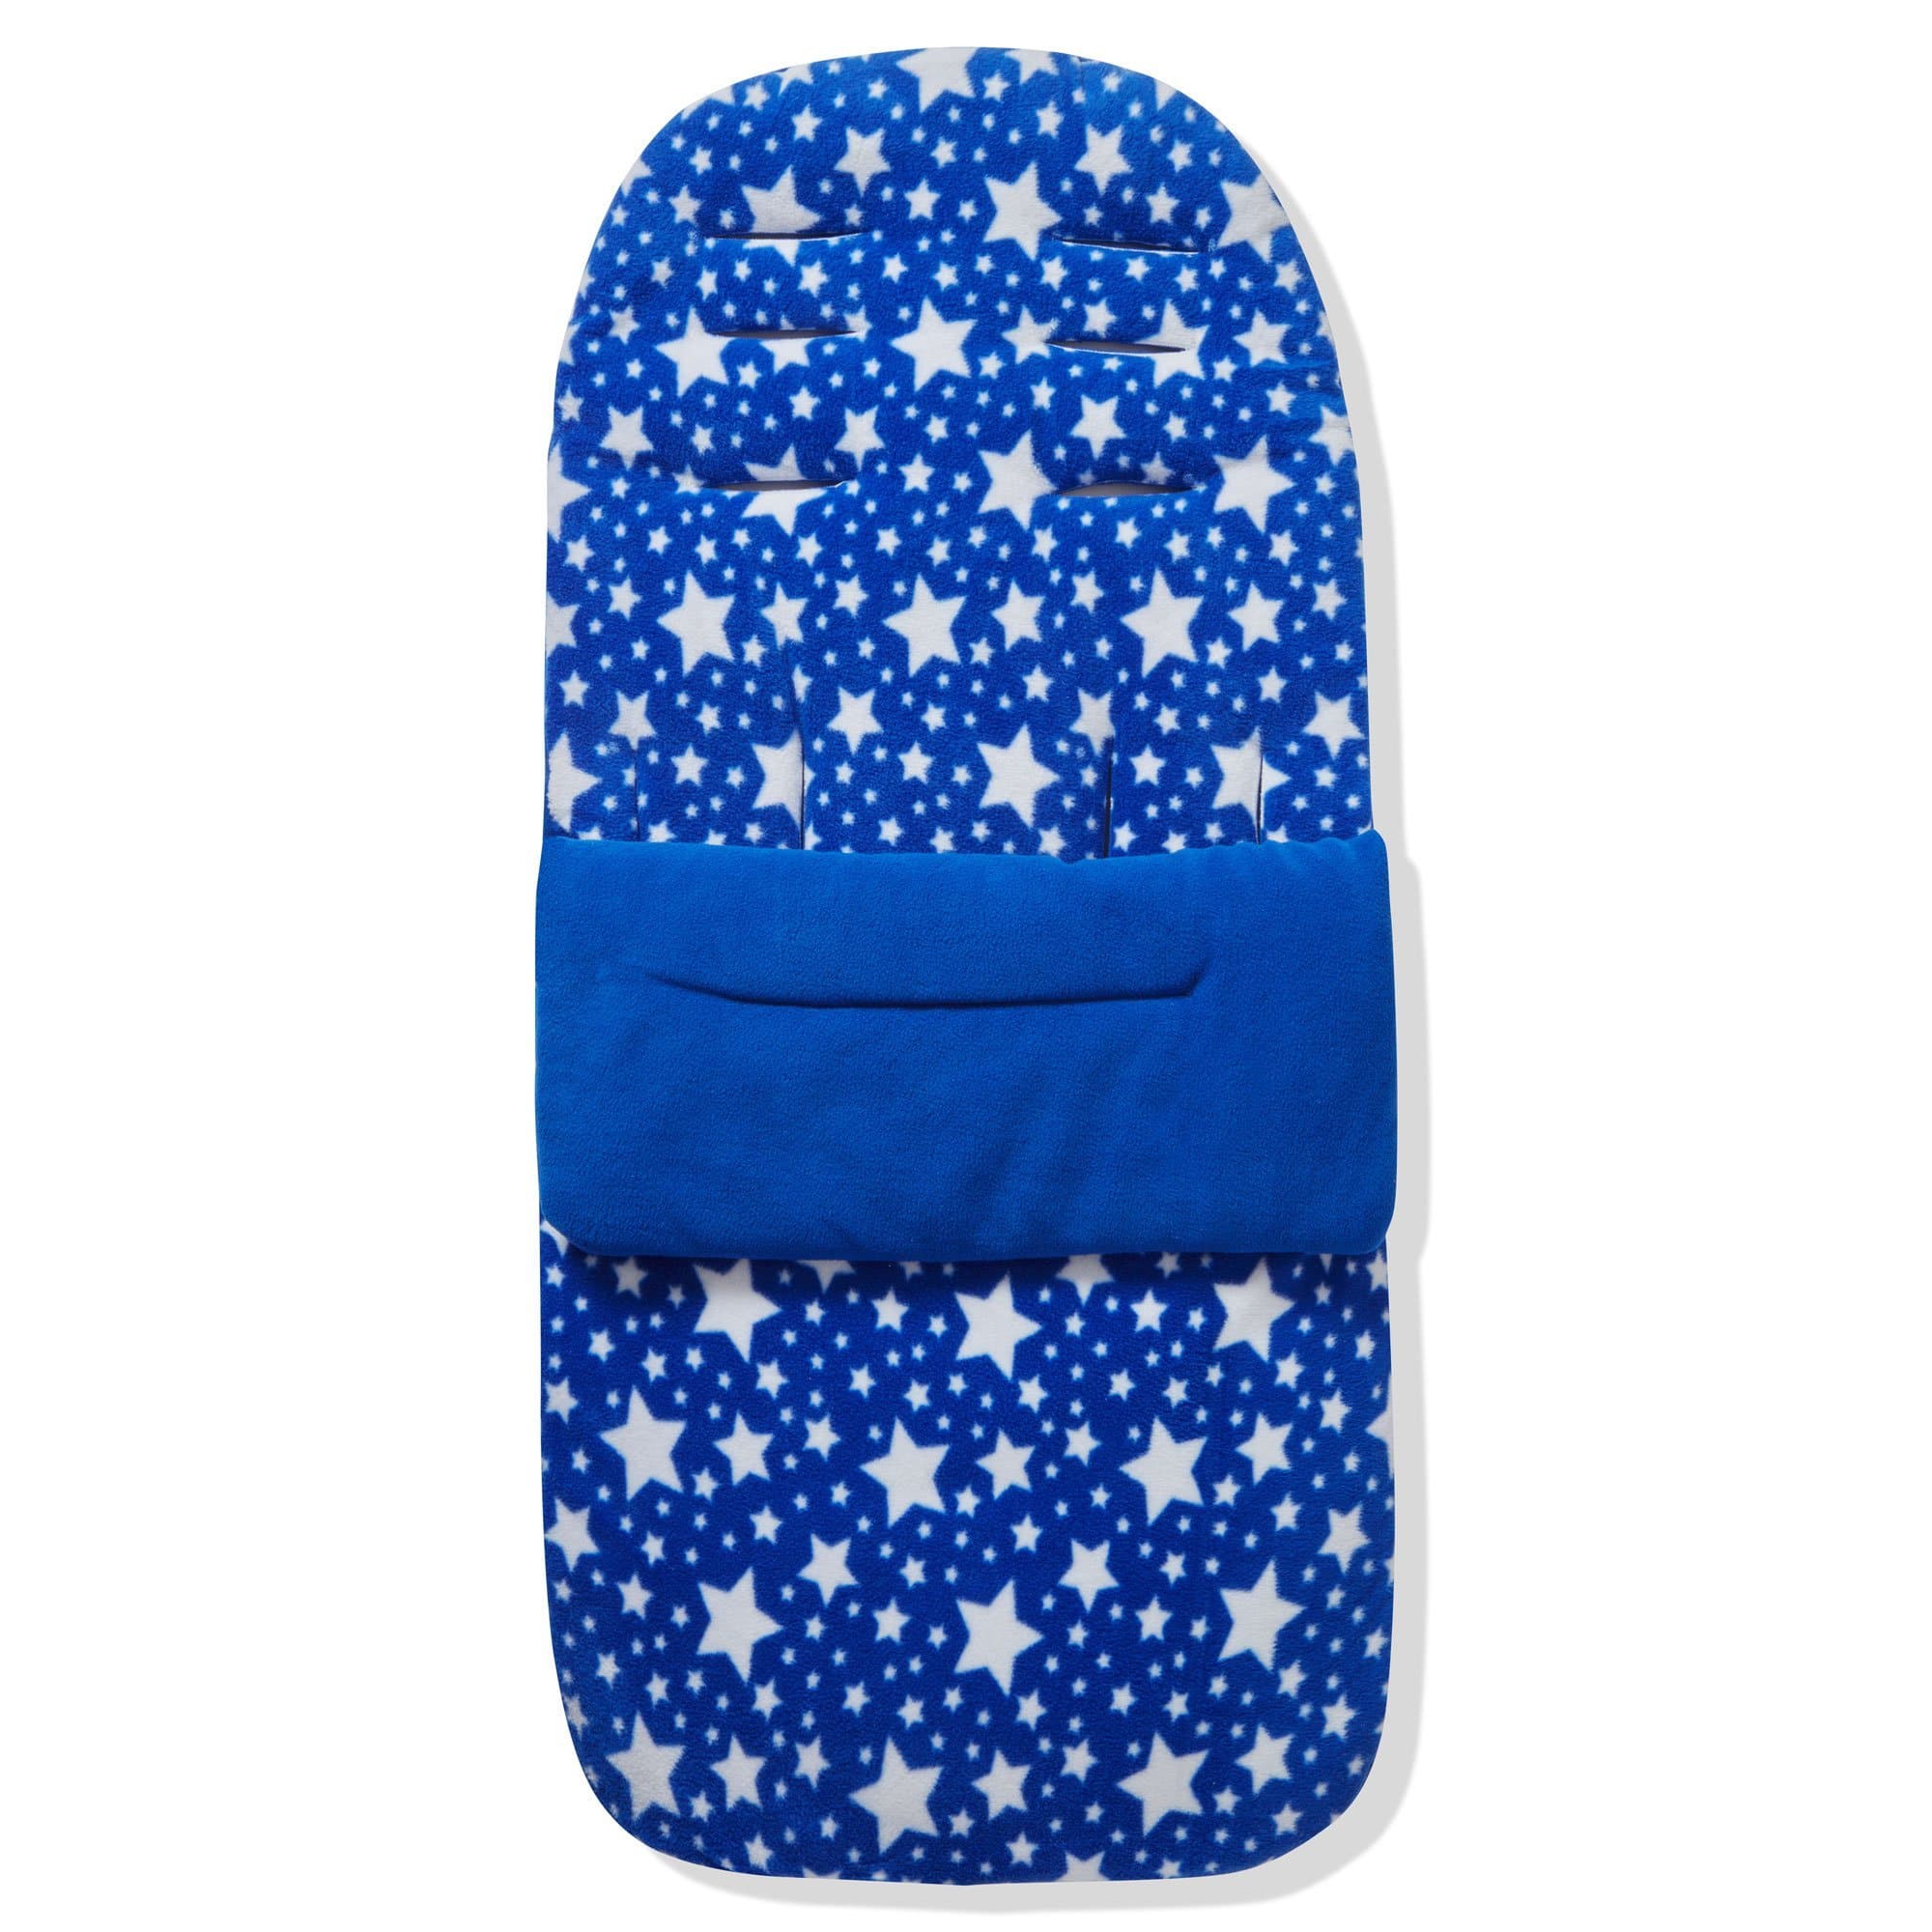 Fleece Footmuff / Cosy Toes Compatible with Safety 1st - Blue Star / Fits All Models | For Your Little One